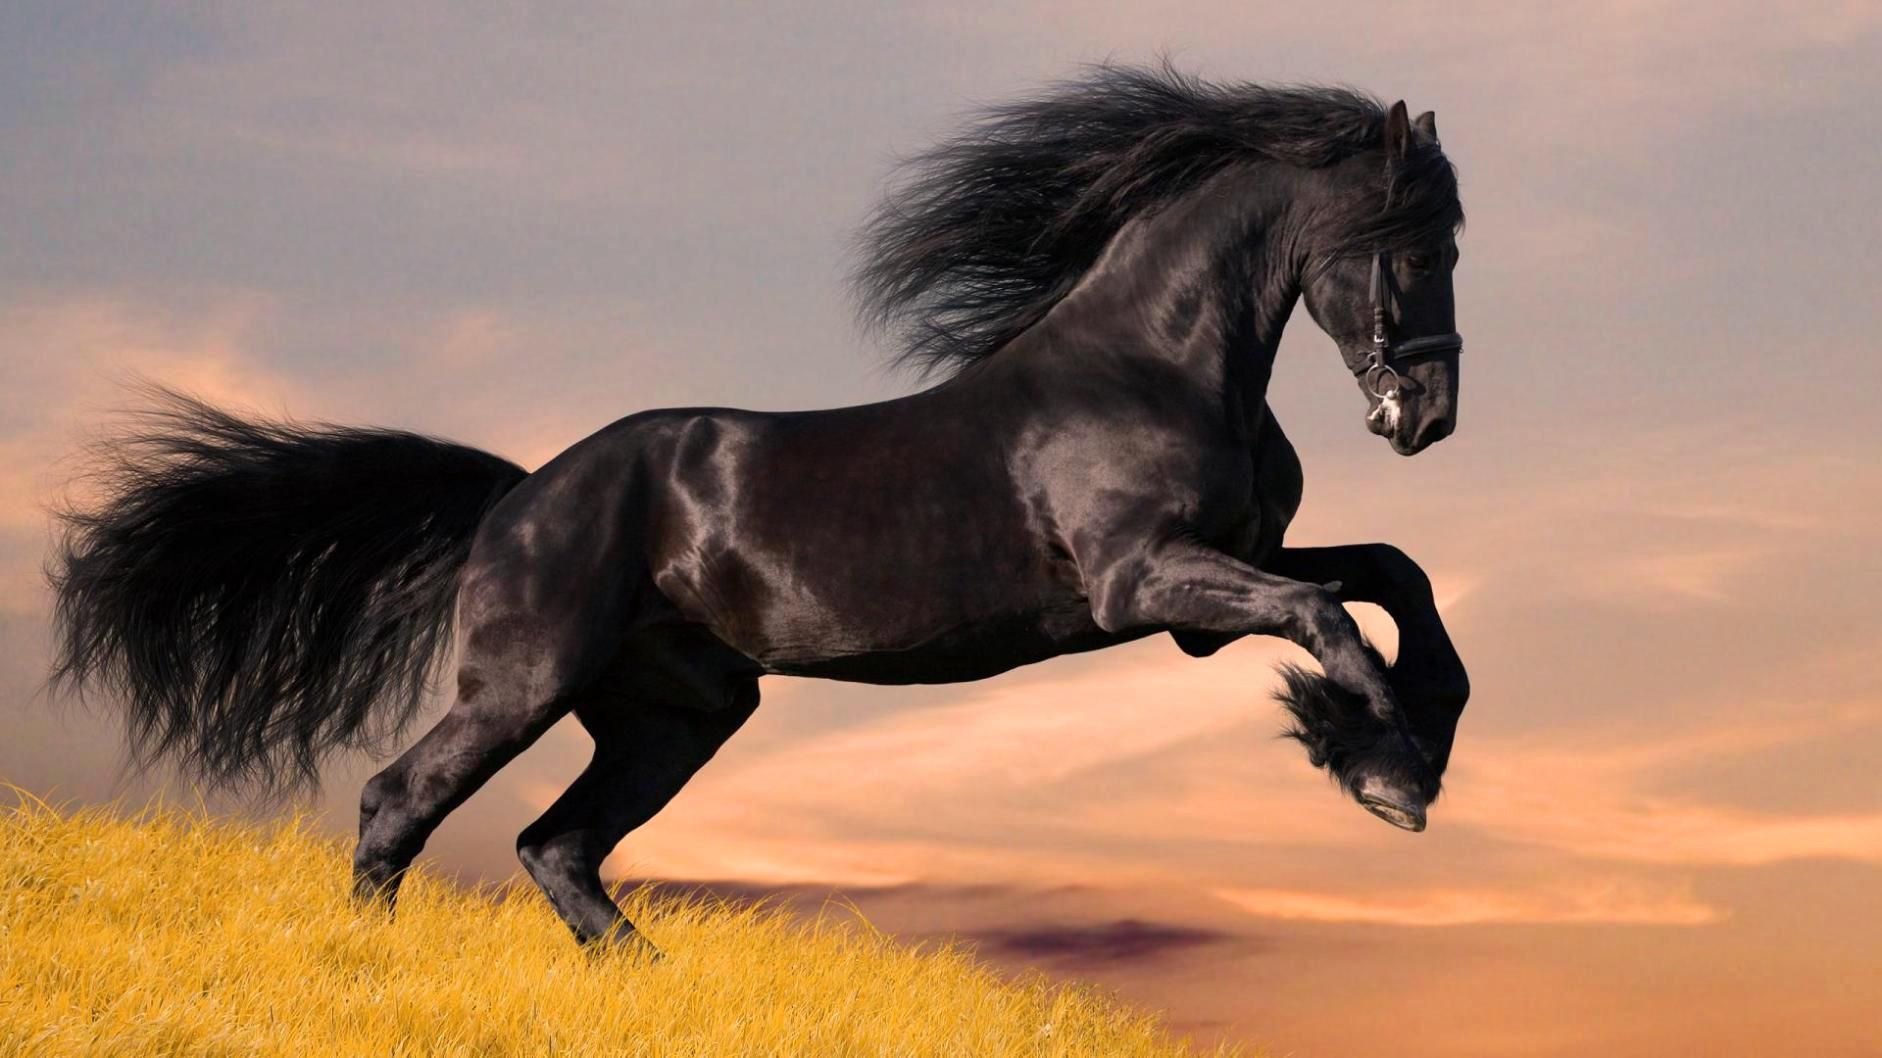 60 Most Beautiful Horse Wallpapers   Download at WallpaperBro 1882x1058